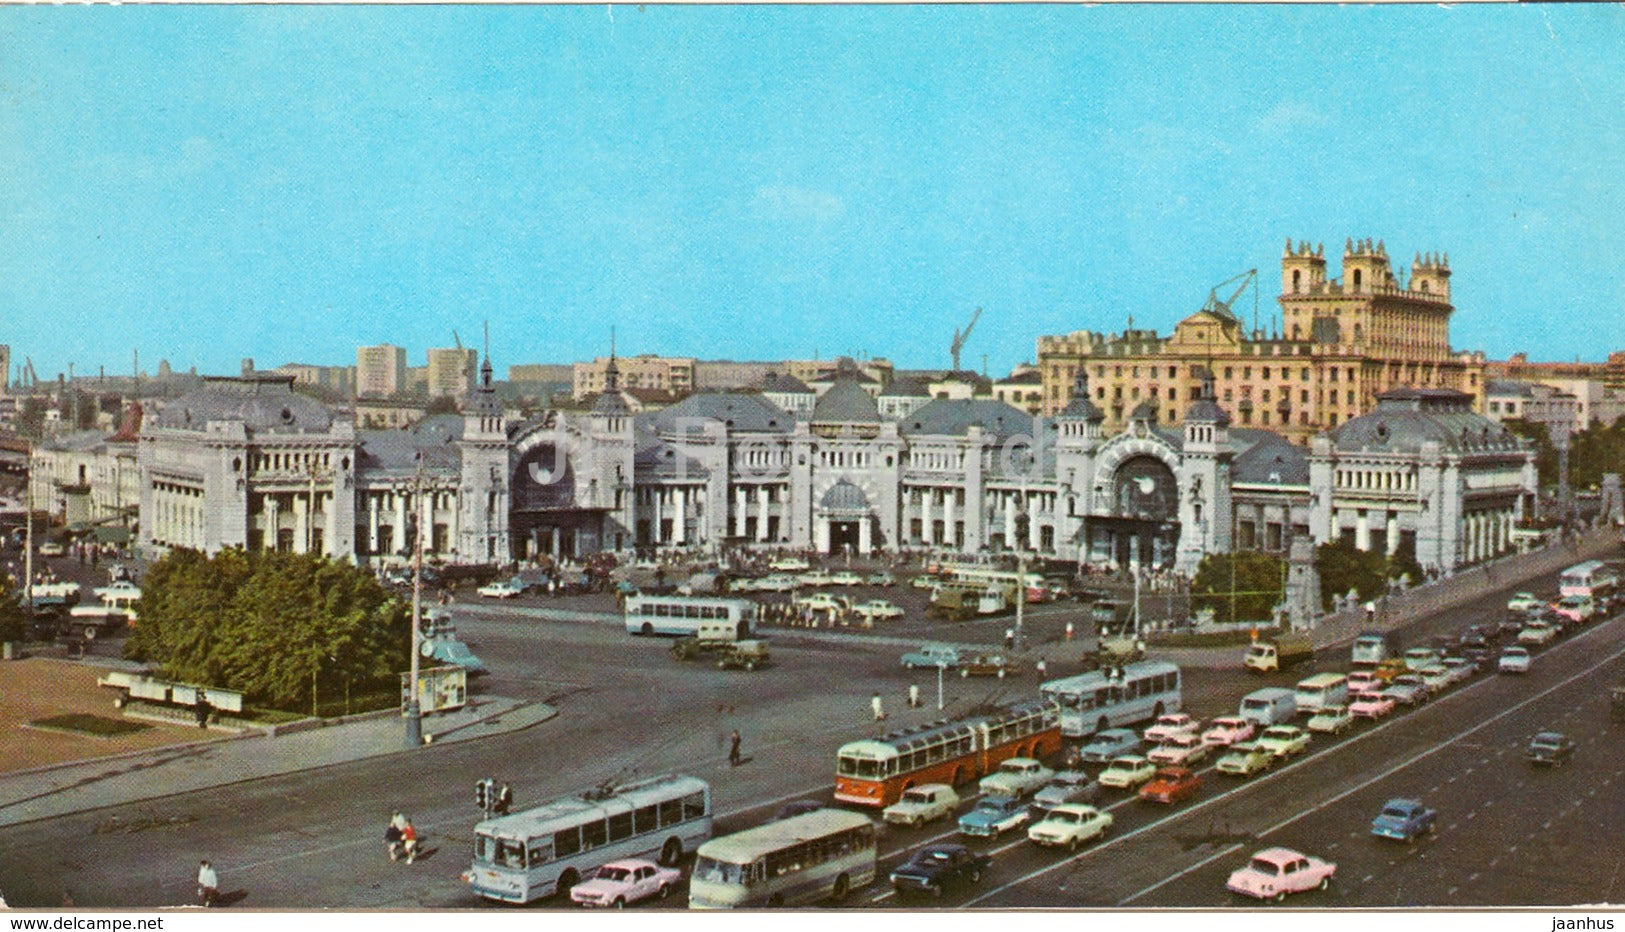 Moscow - Byelorussky Railway Station - trolleybus - bus - cars - Russia USSR - unused - JH Postcards